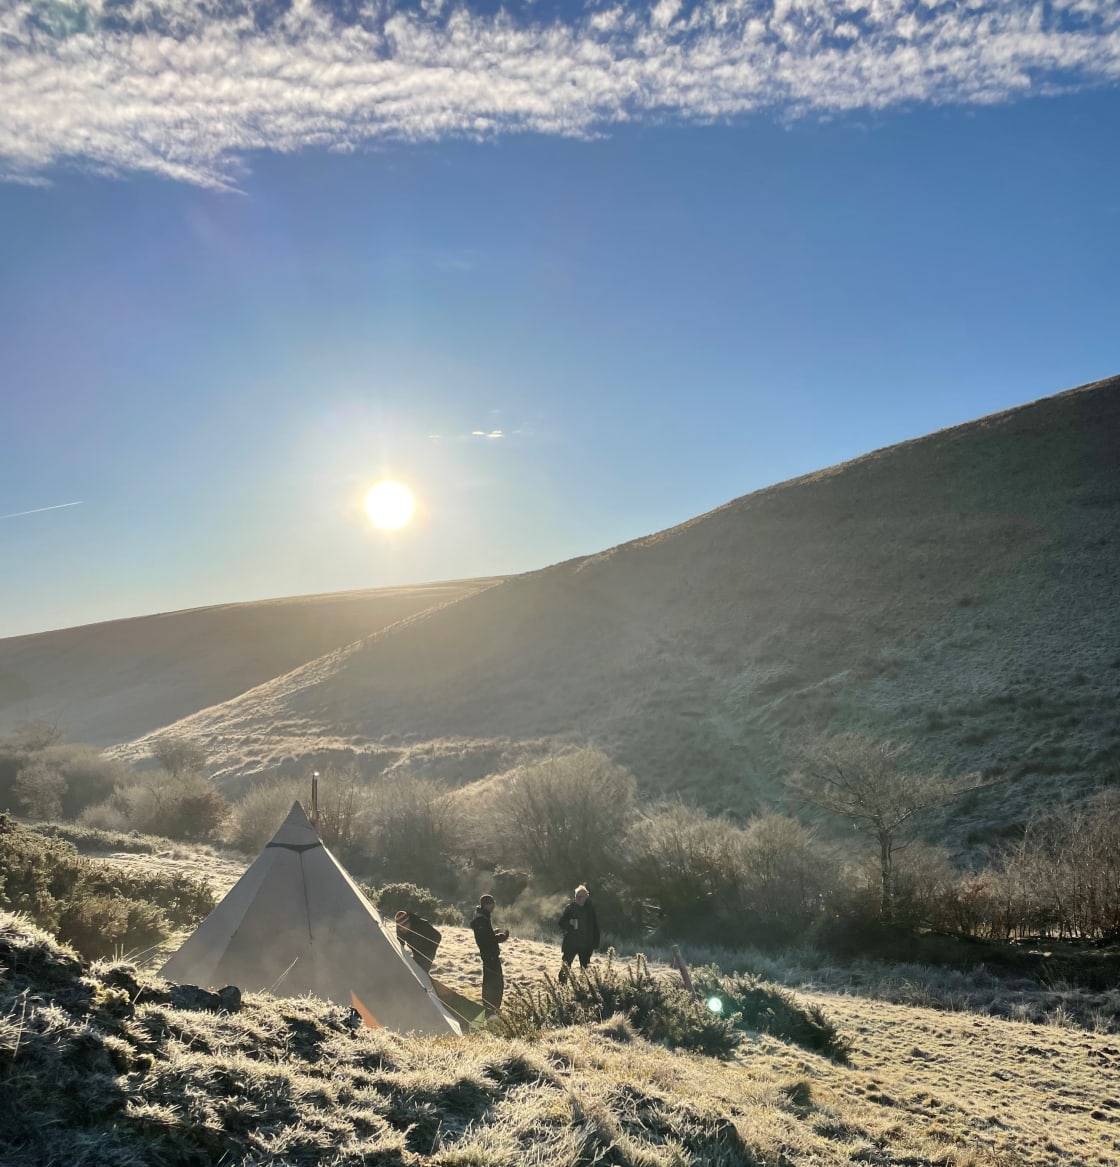 Wild camping at Emmetts on Exmoor